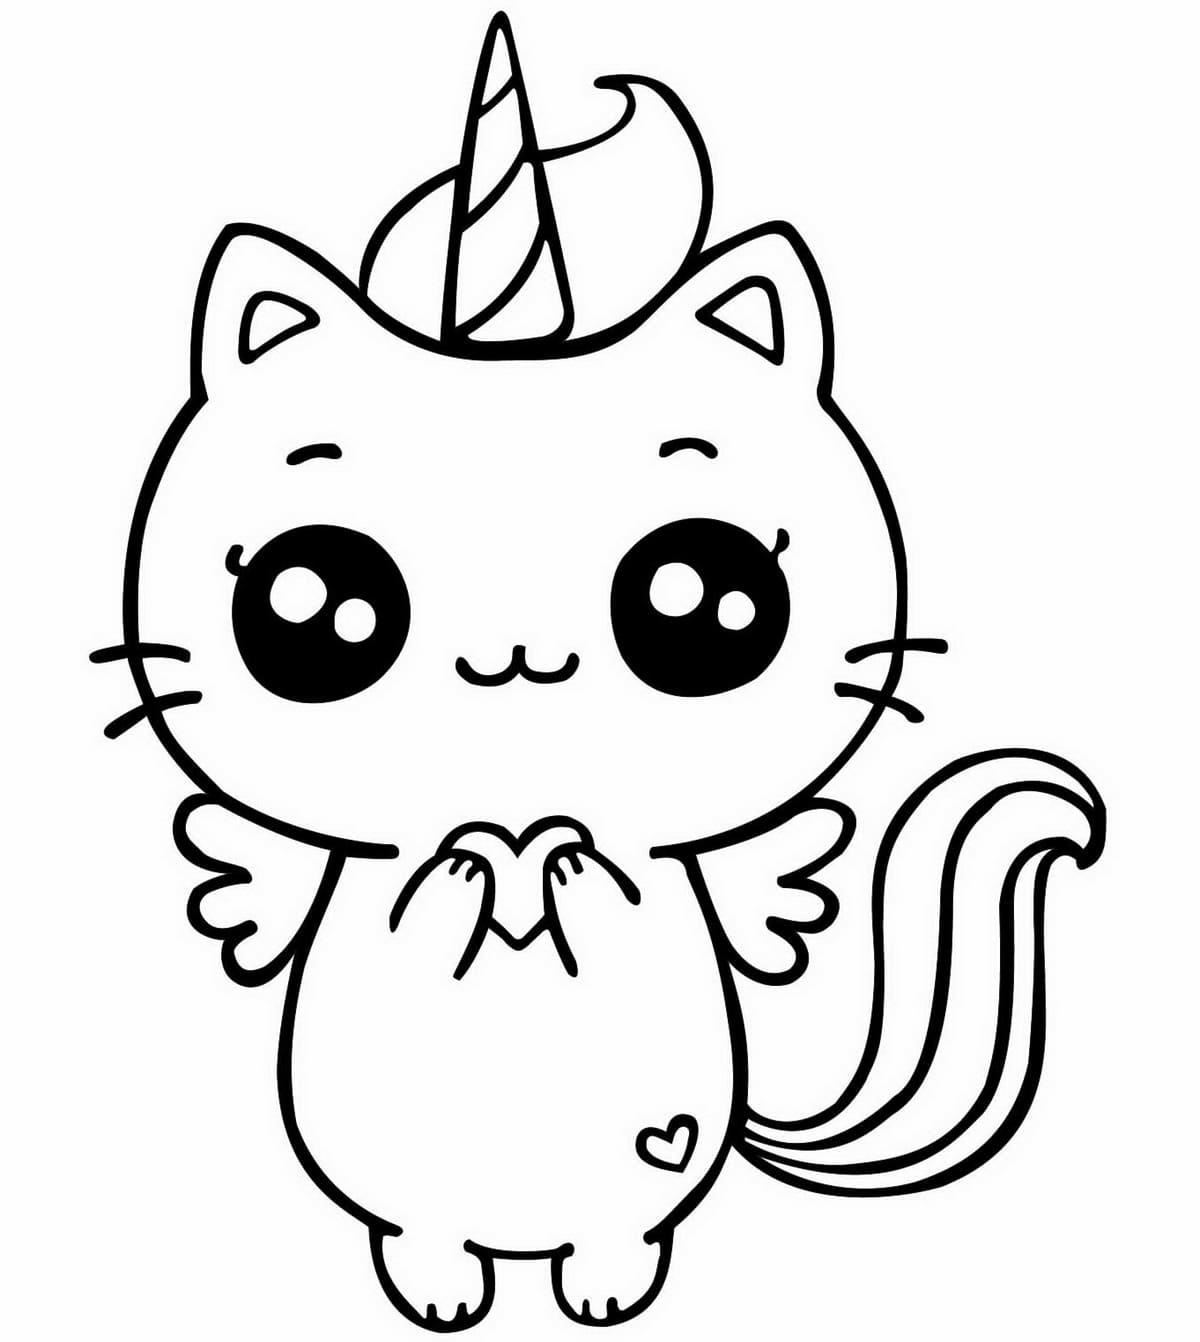 Coloring page Unicorn Cat with a heart